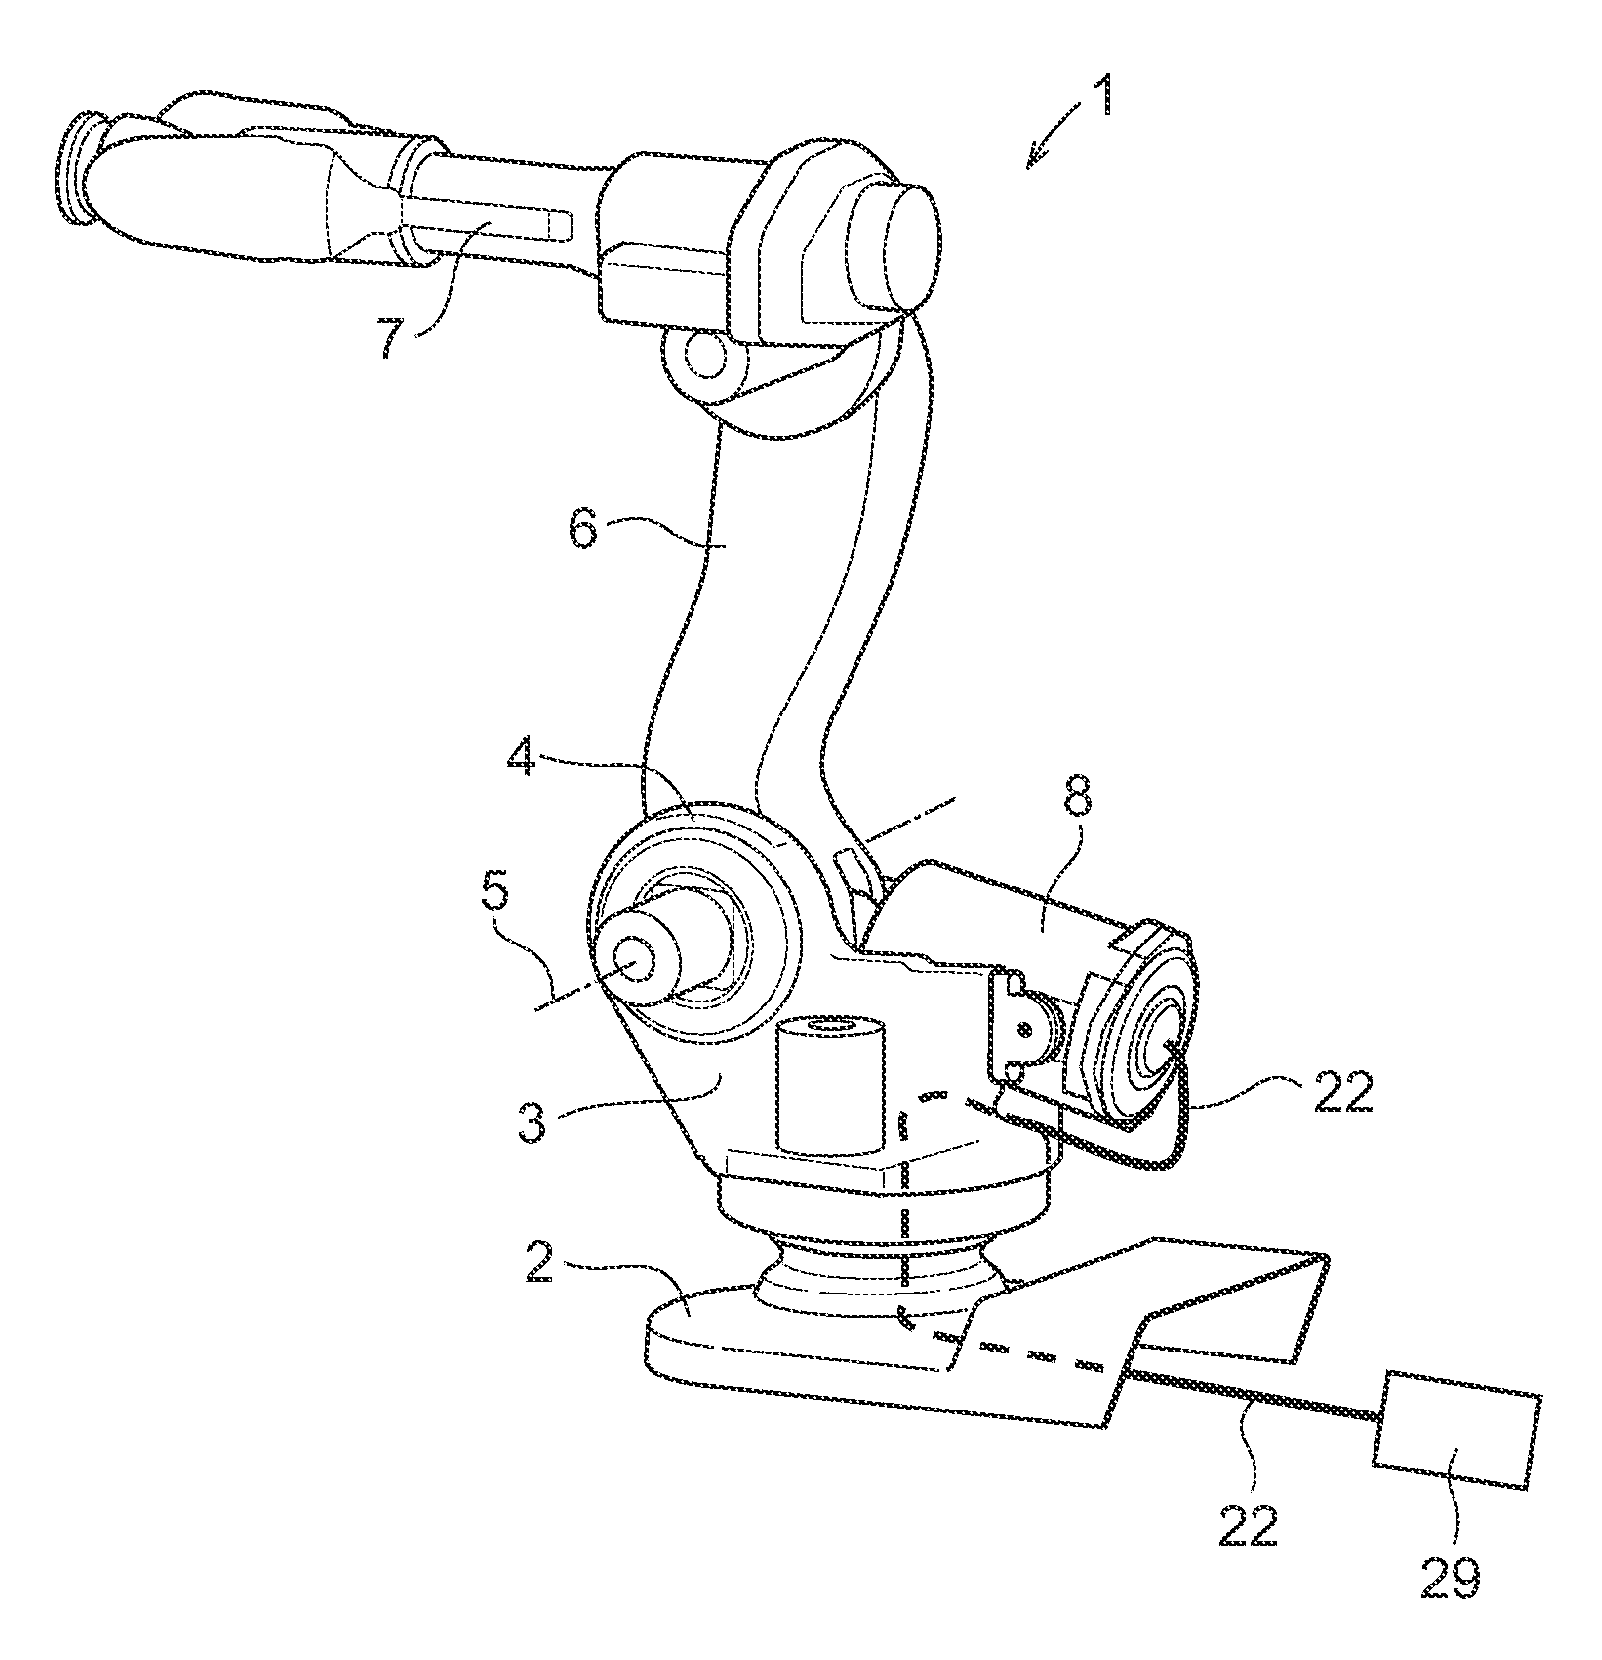 Industrial robot with pressurized air supply in balancing device